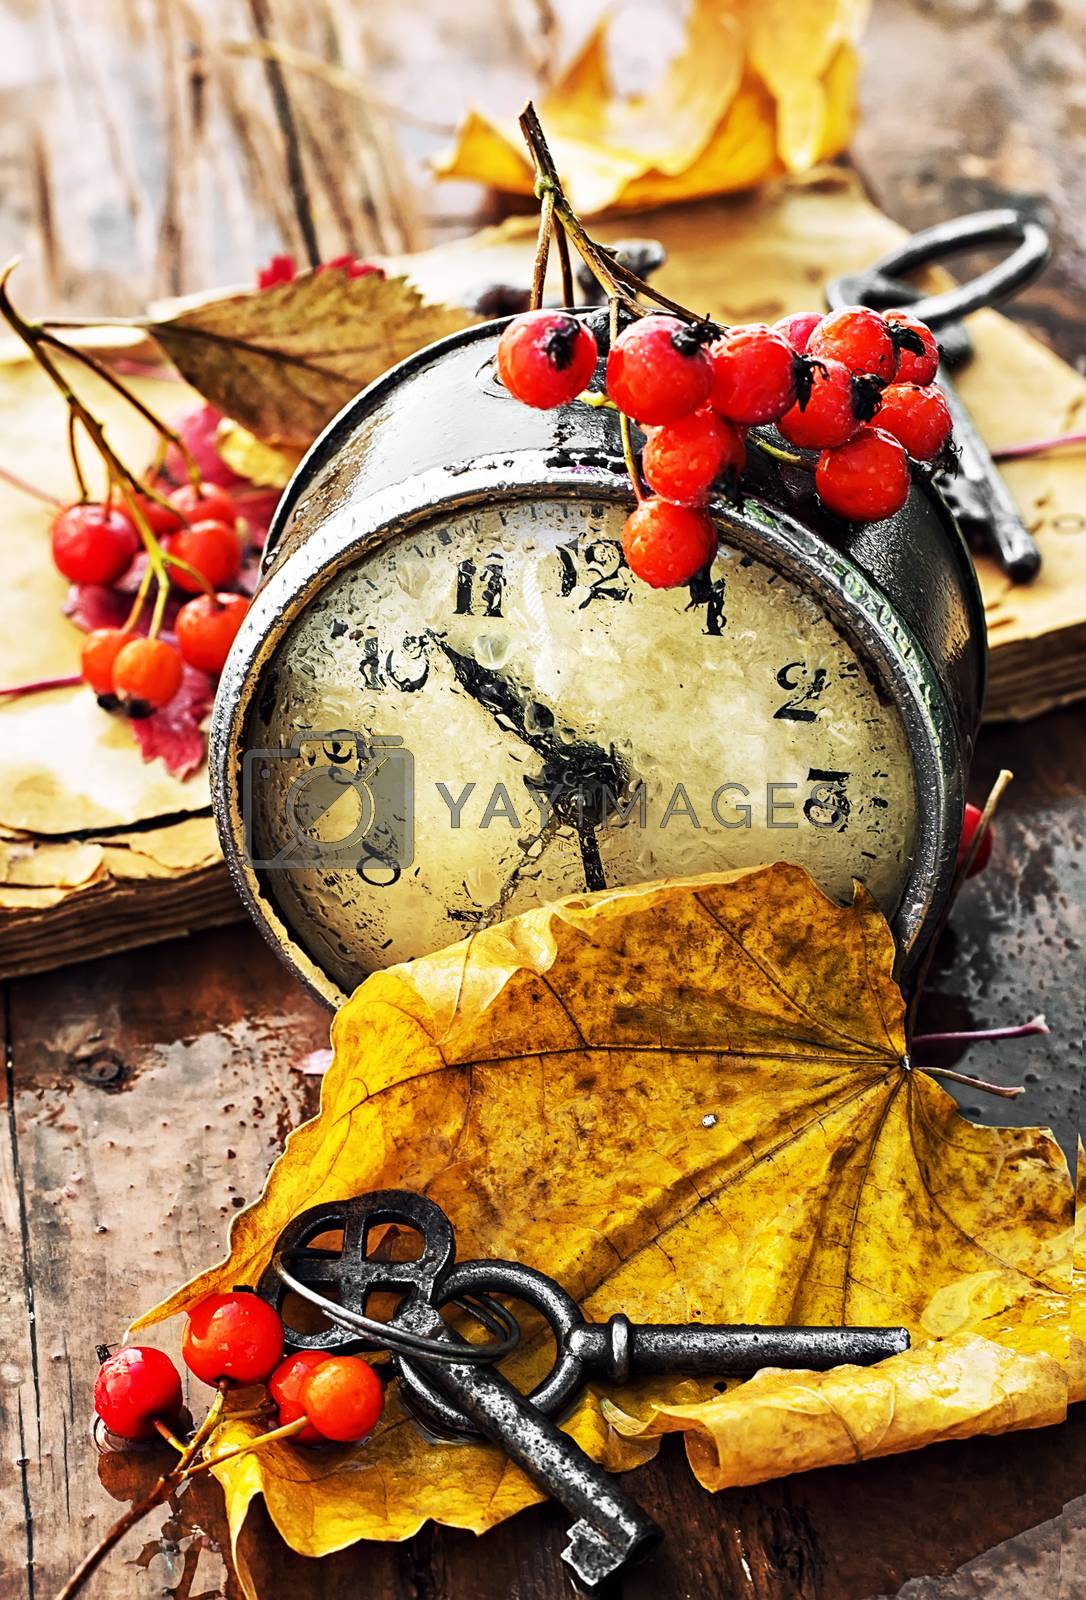 Royalty free image of Alarm clock and fallen leaves by LMykola